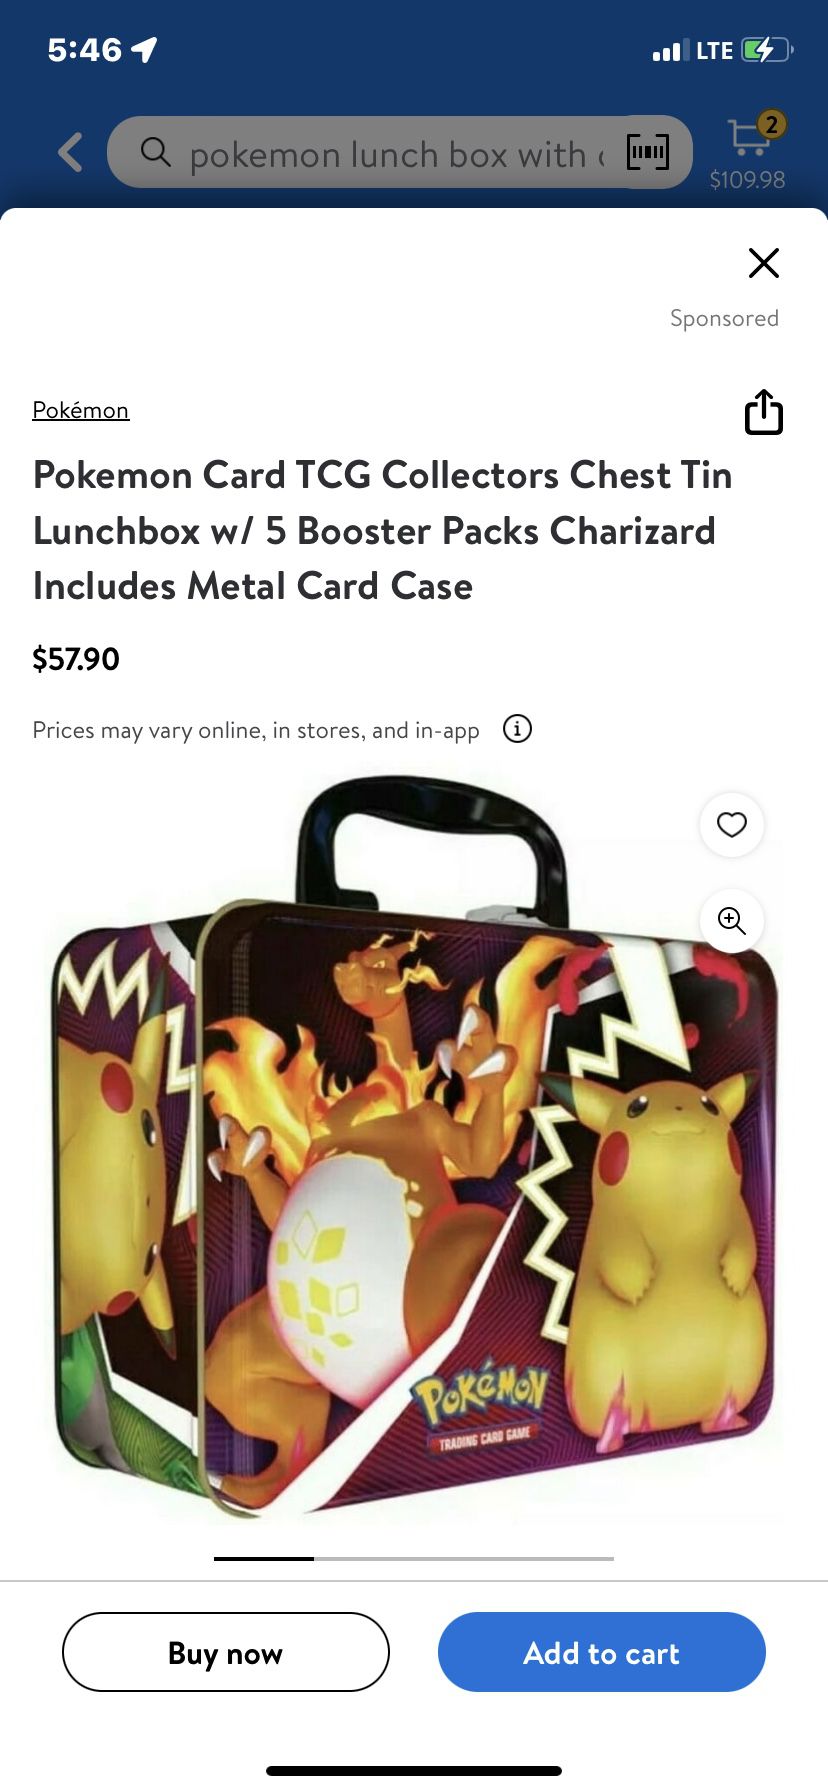 Pokémon Lunch Box With Cards 